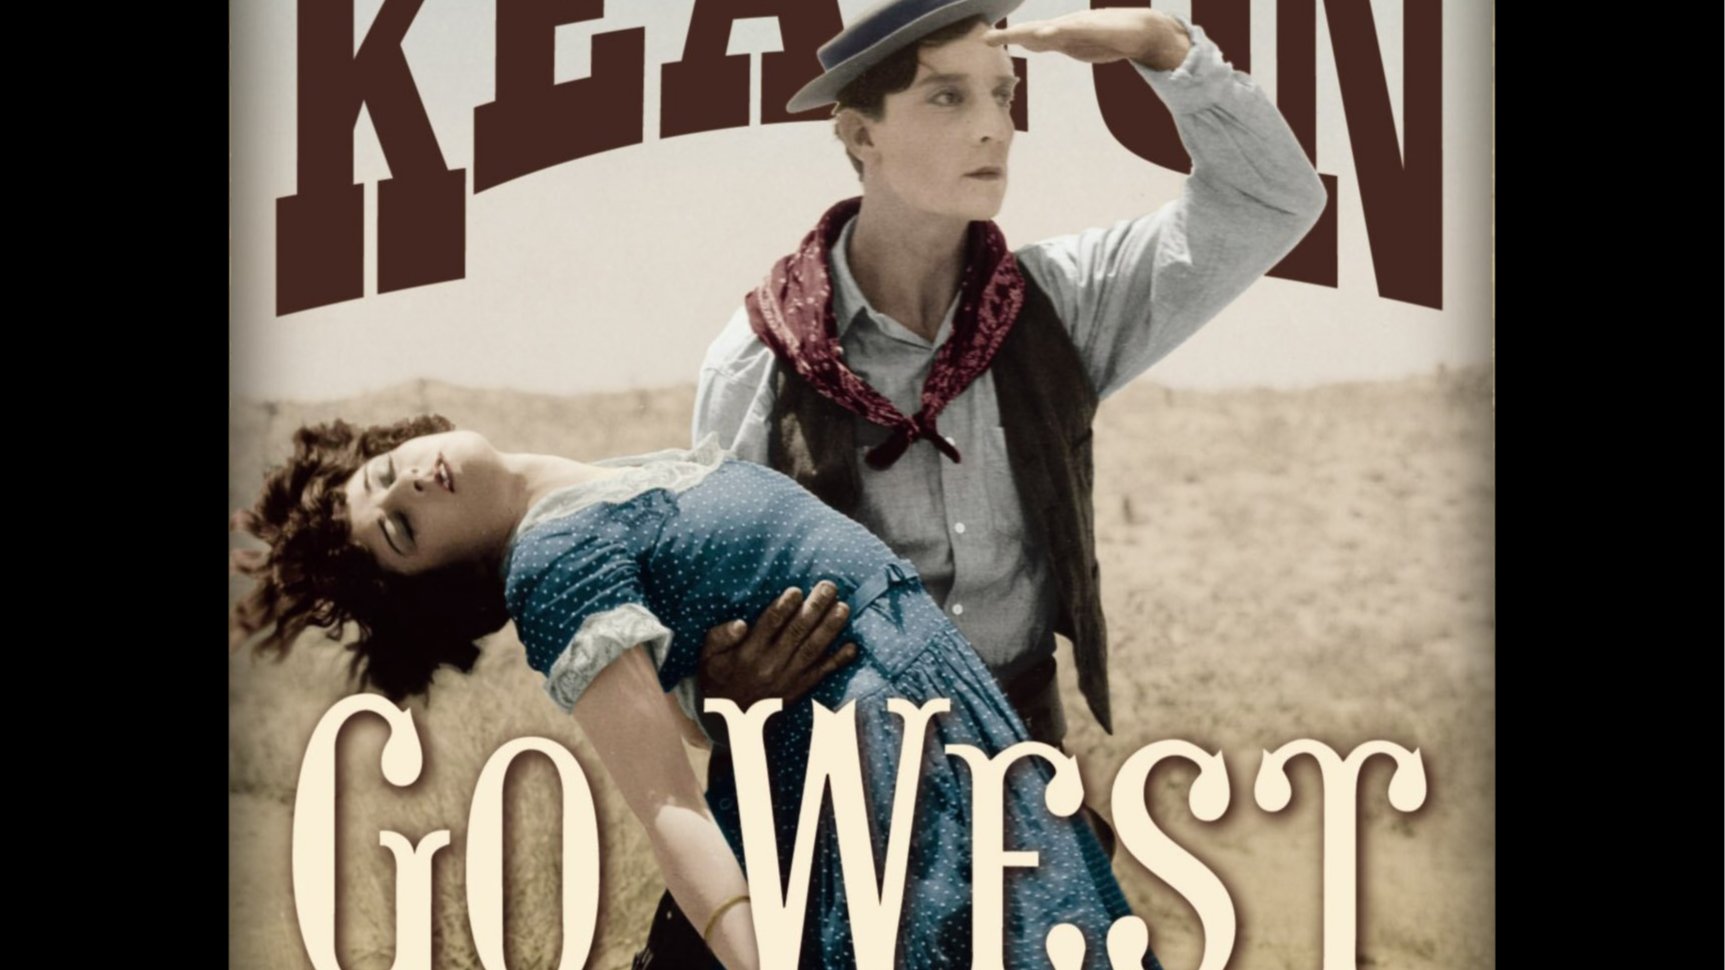 Go West - Buster Keaton